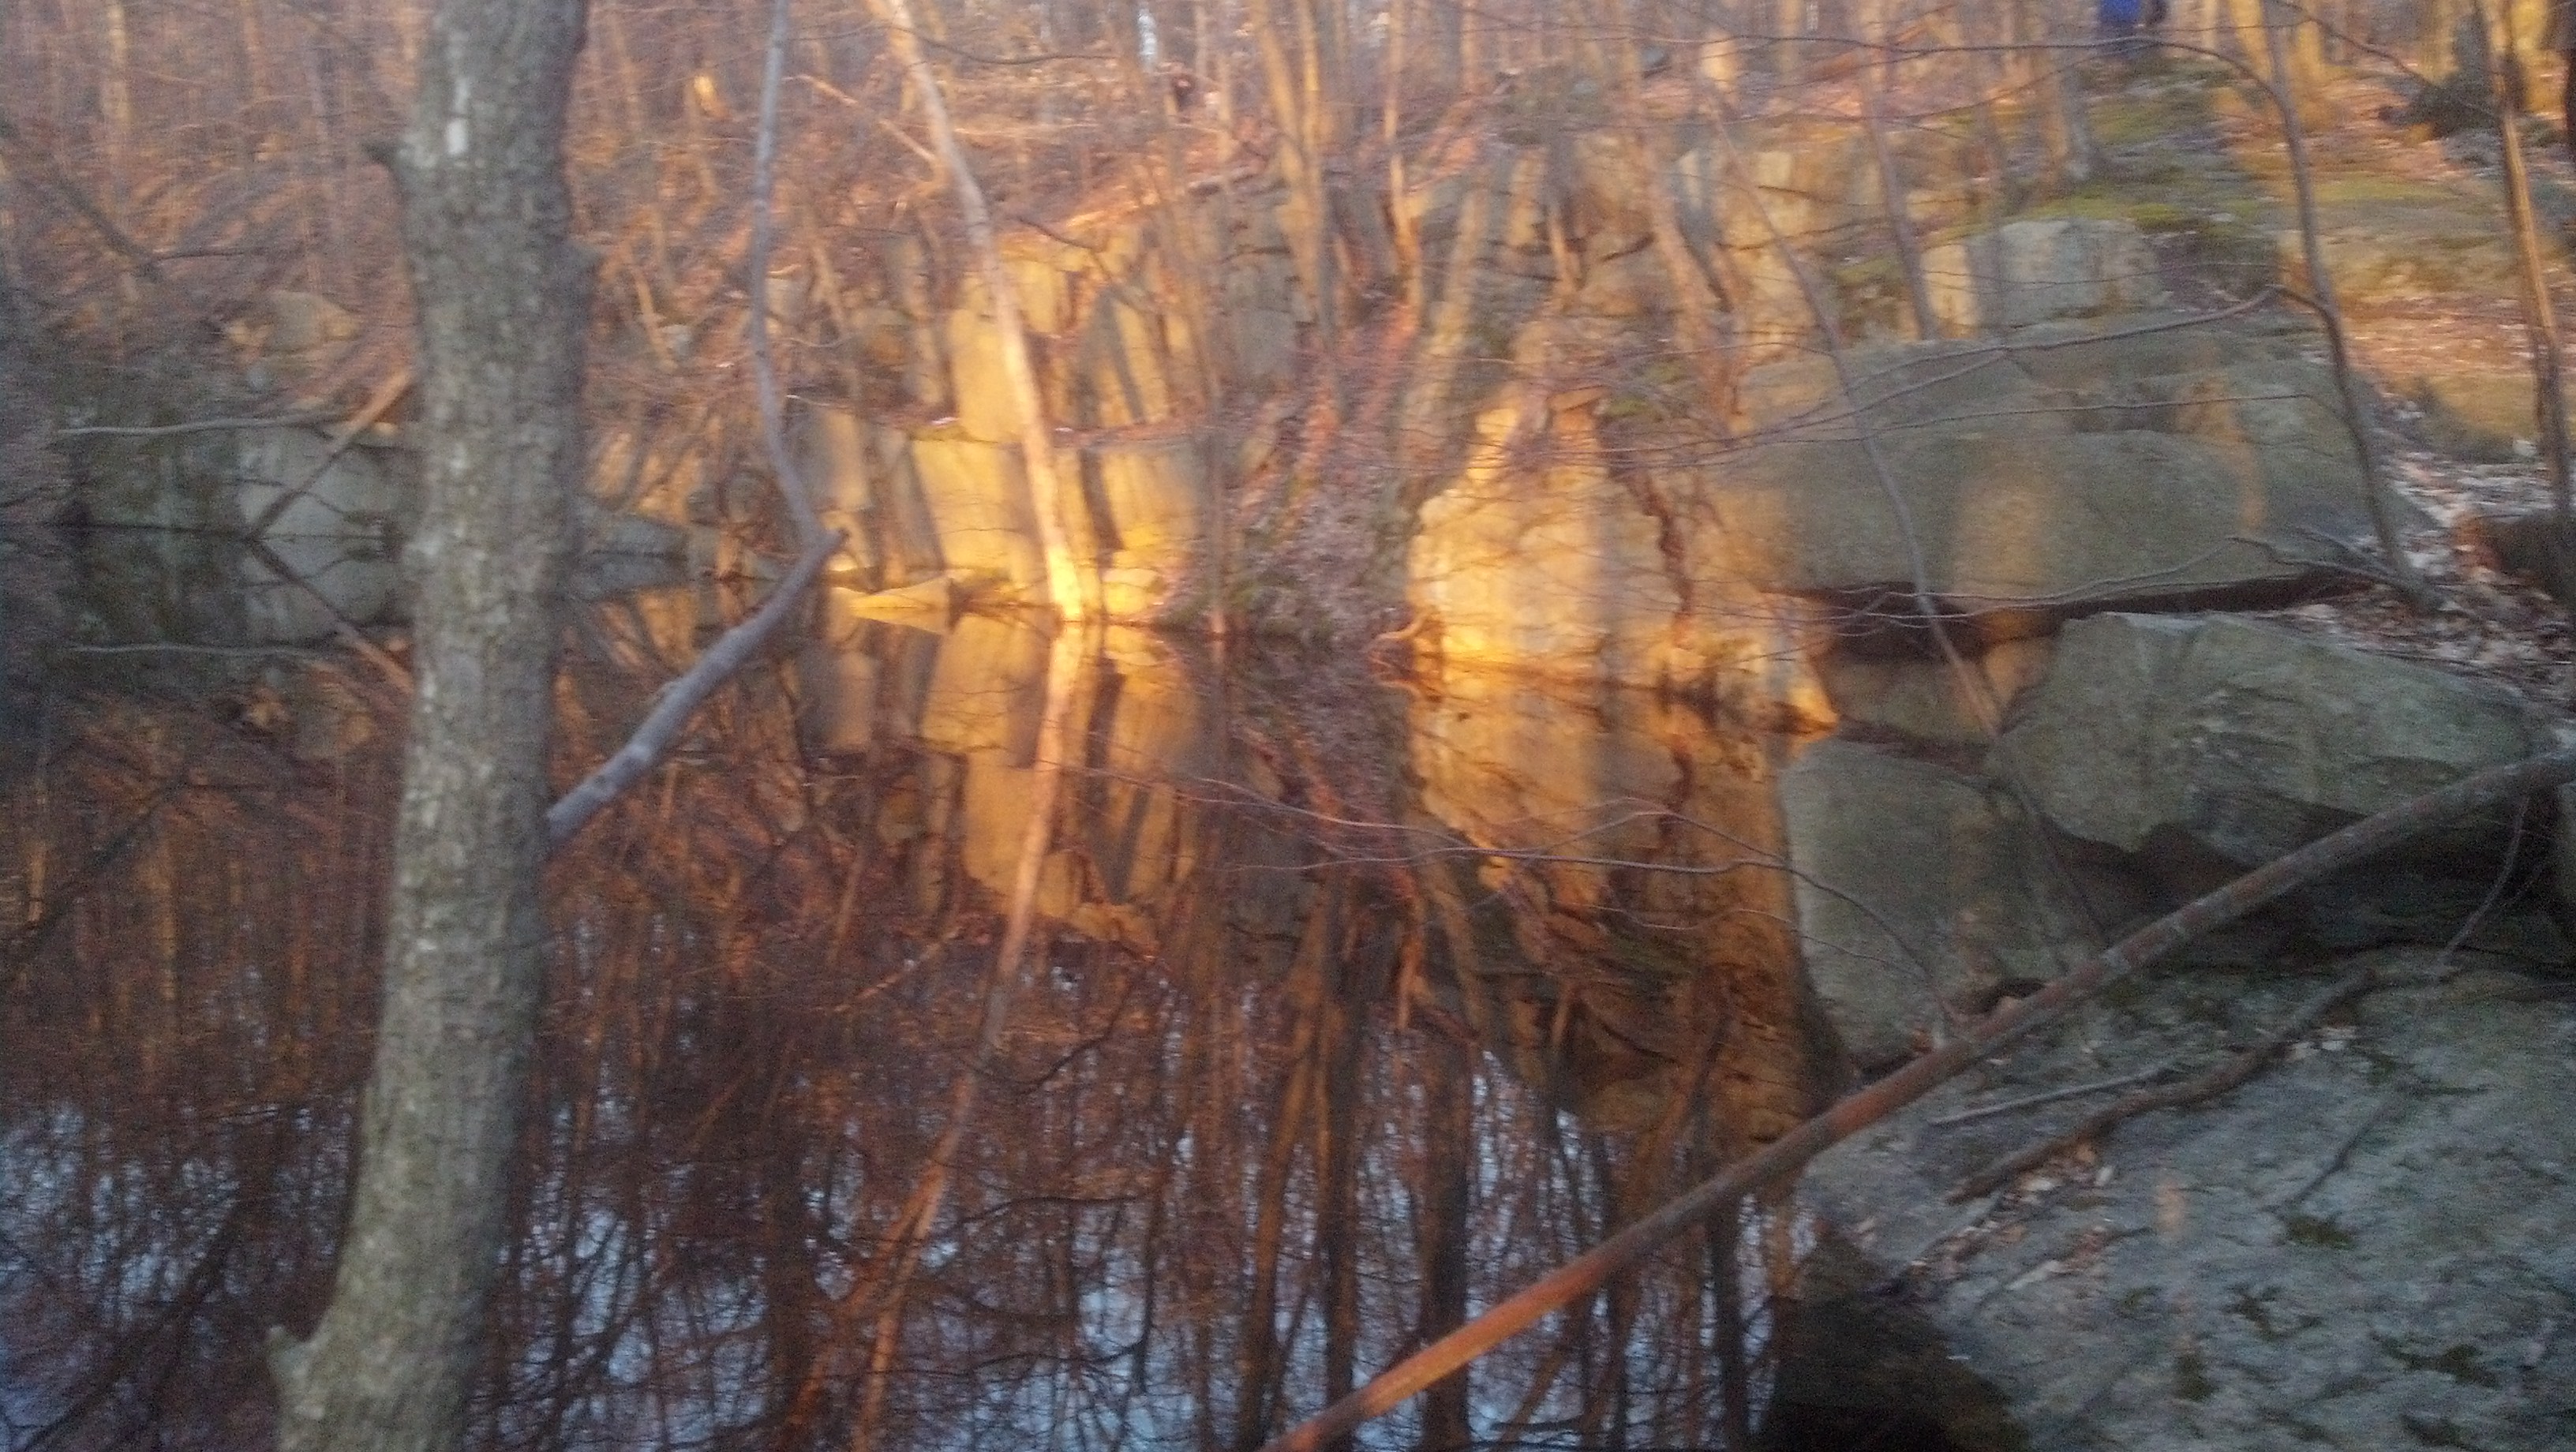 Sunset on the rocks at a quarry in Sylvan Glen Photo: Jane Daniels